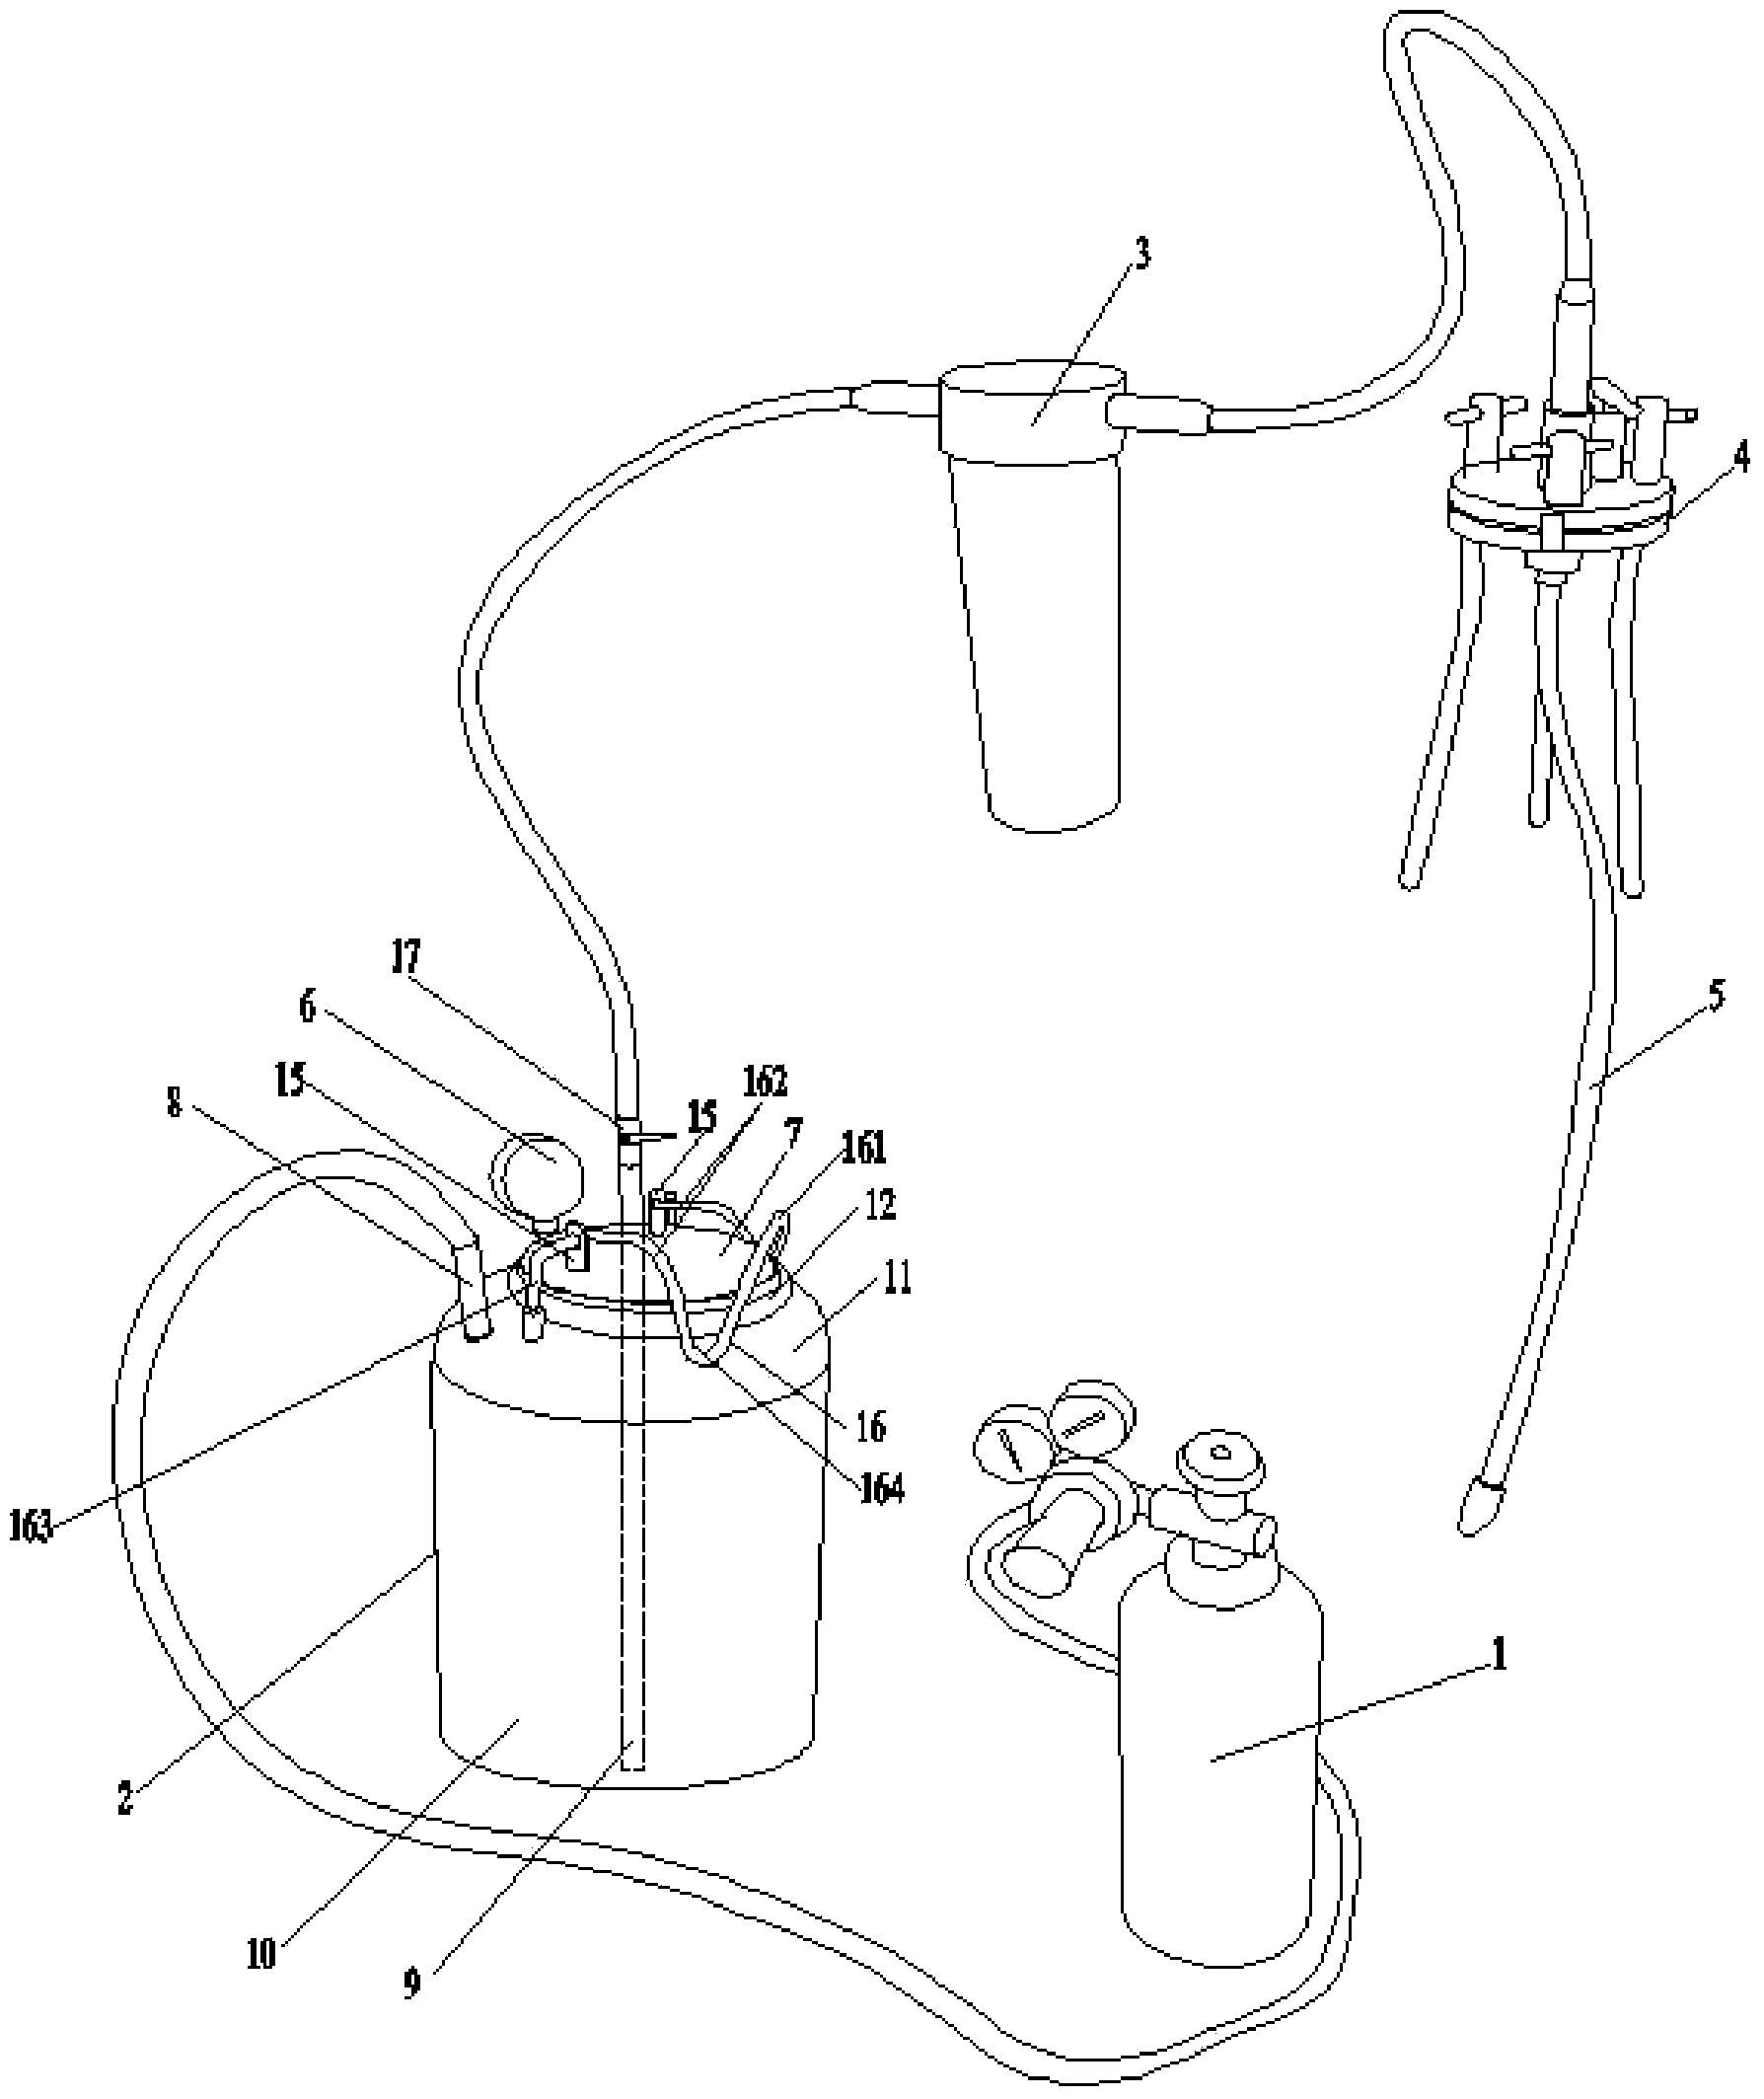 Device for separating and extracting virus in water and method for extracting sapovirus in water